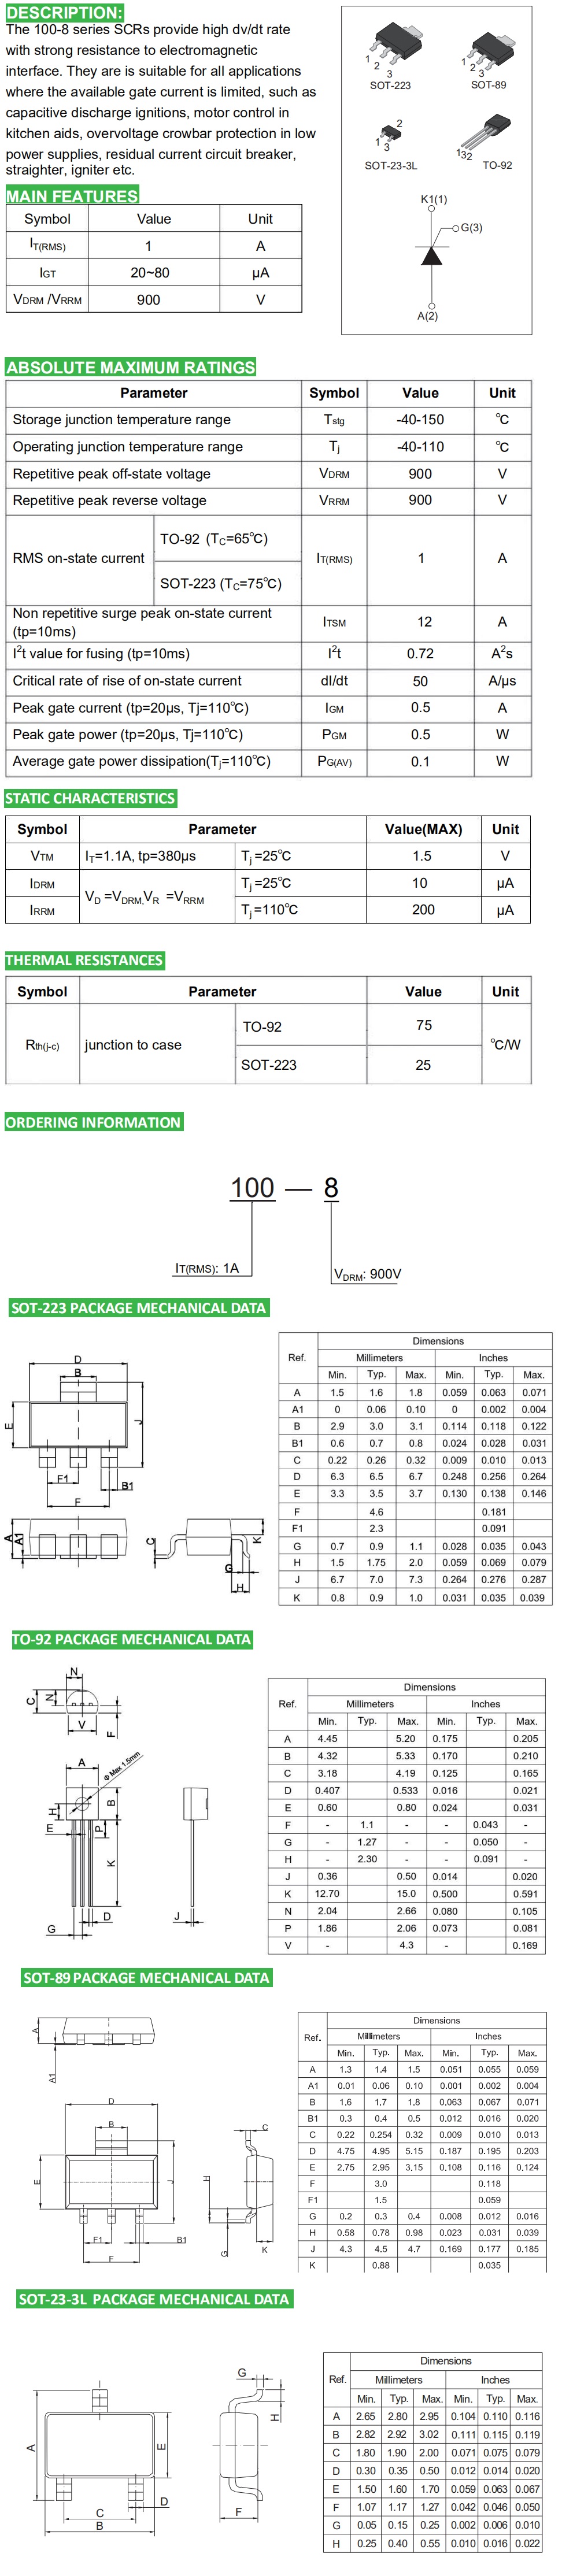 Description,Main Features,Absolute Maximum Ratings,Static Characteristics,Thermal Resistances,Ordering Information.SOT-233 Package Mechanical Data,TO-92 Package Mechanical Data,SOT-89 Package Mechanical Data,SOT-23-3L Package Mechanical Data